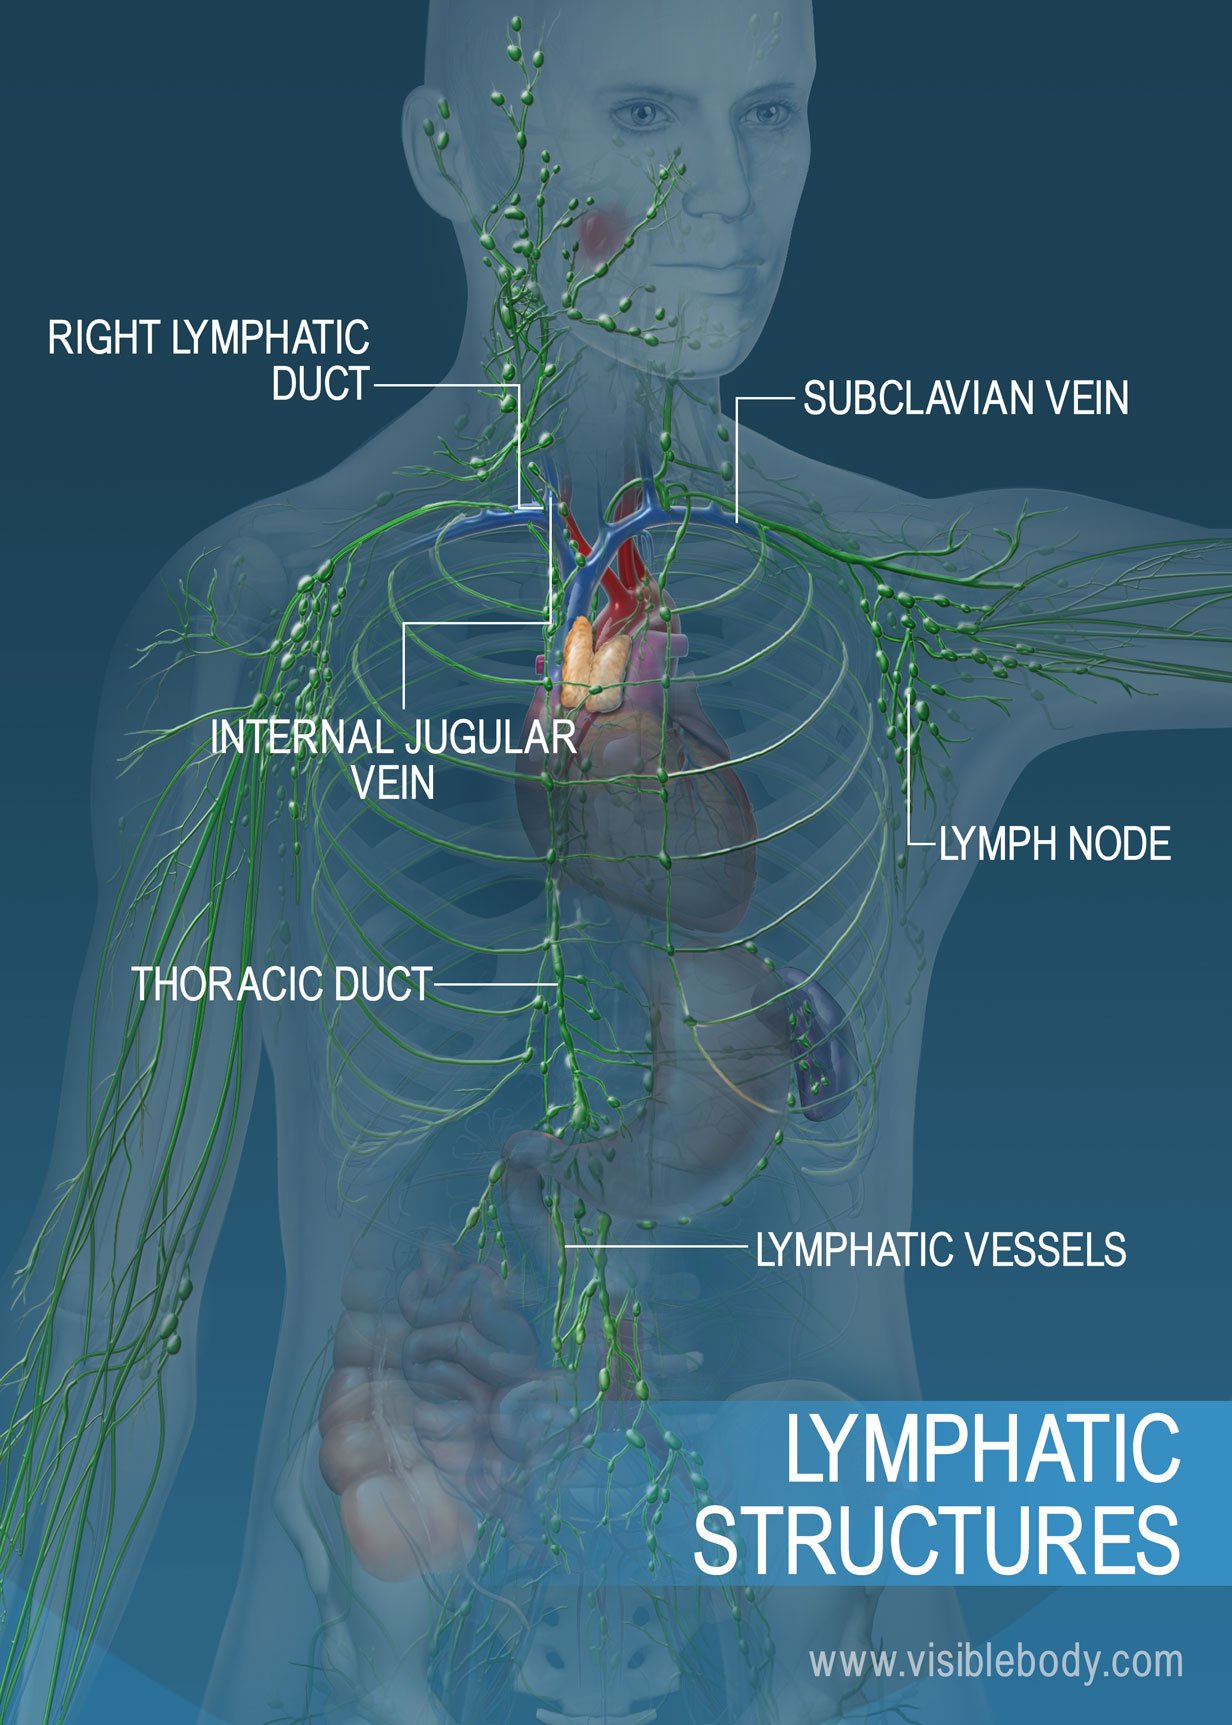 The lymphatic vessel network across the torso and arms. Major structures include the thoracic duct, the right lymphatic duct, and lymphatic vessels.